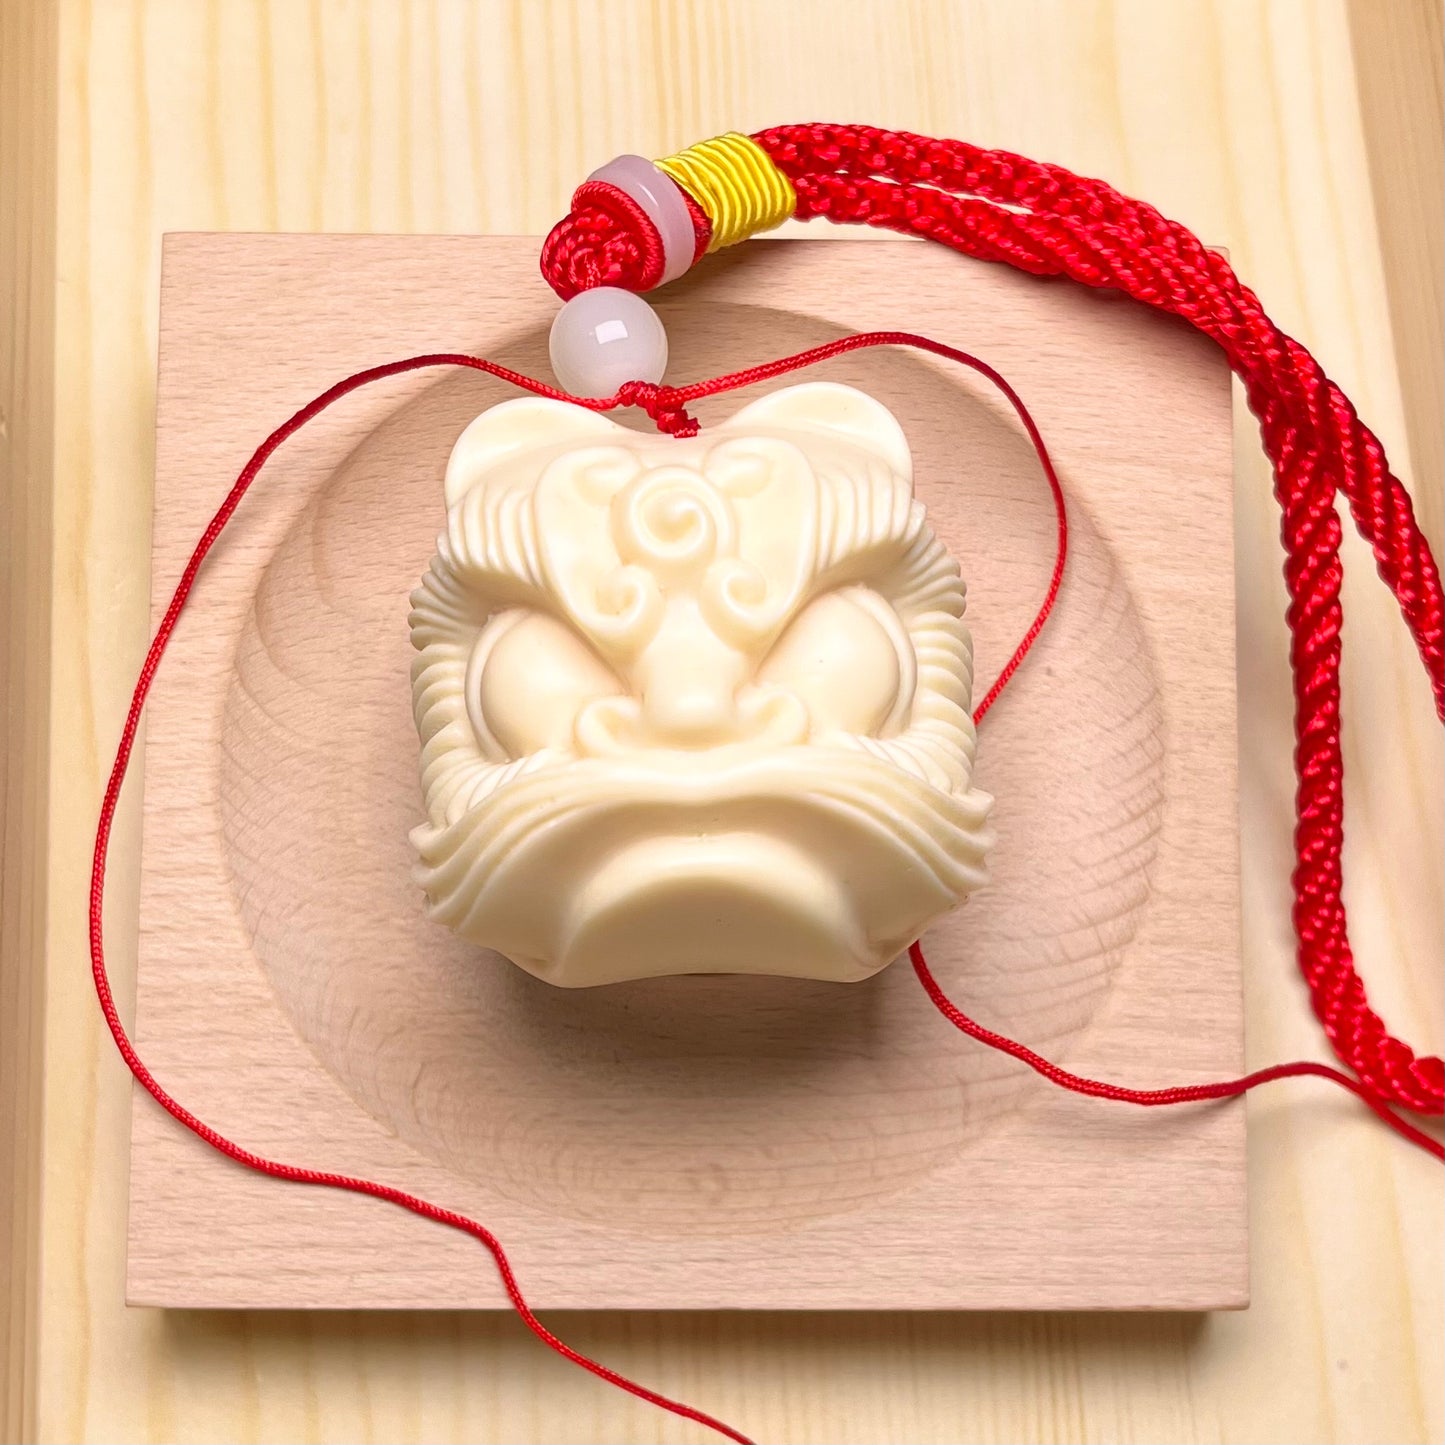 Ivory nut Lion dance carving accessories